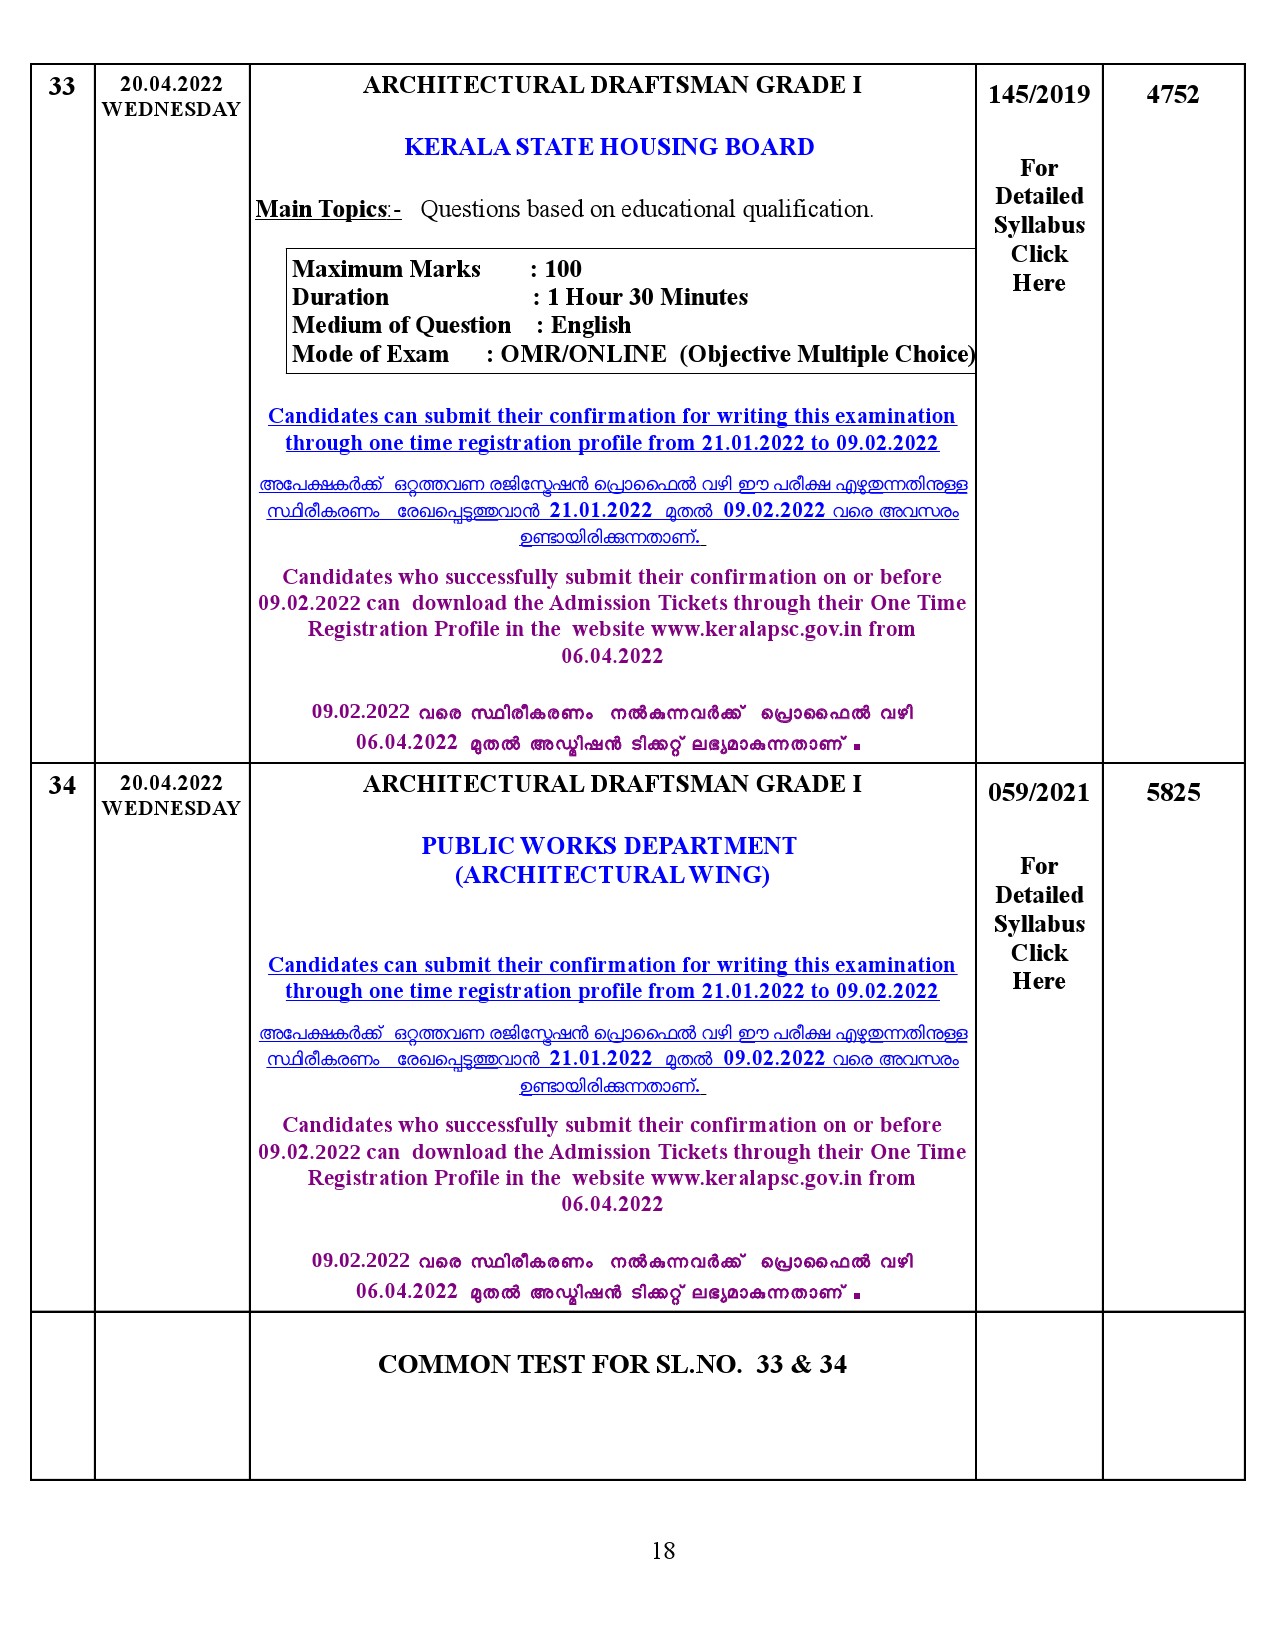 Examination Programme For The Month Of April 2022 - Notification Image 18